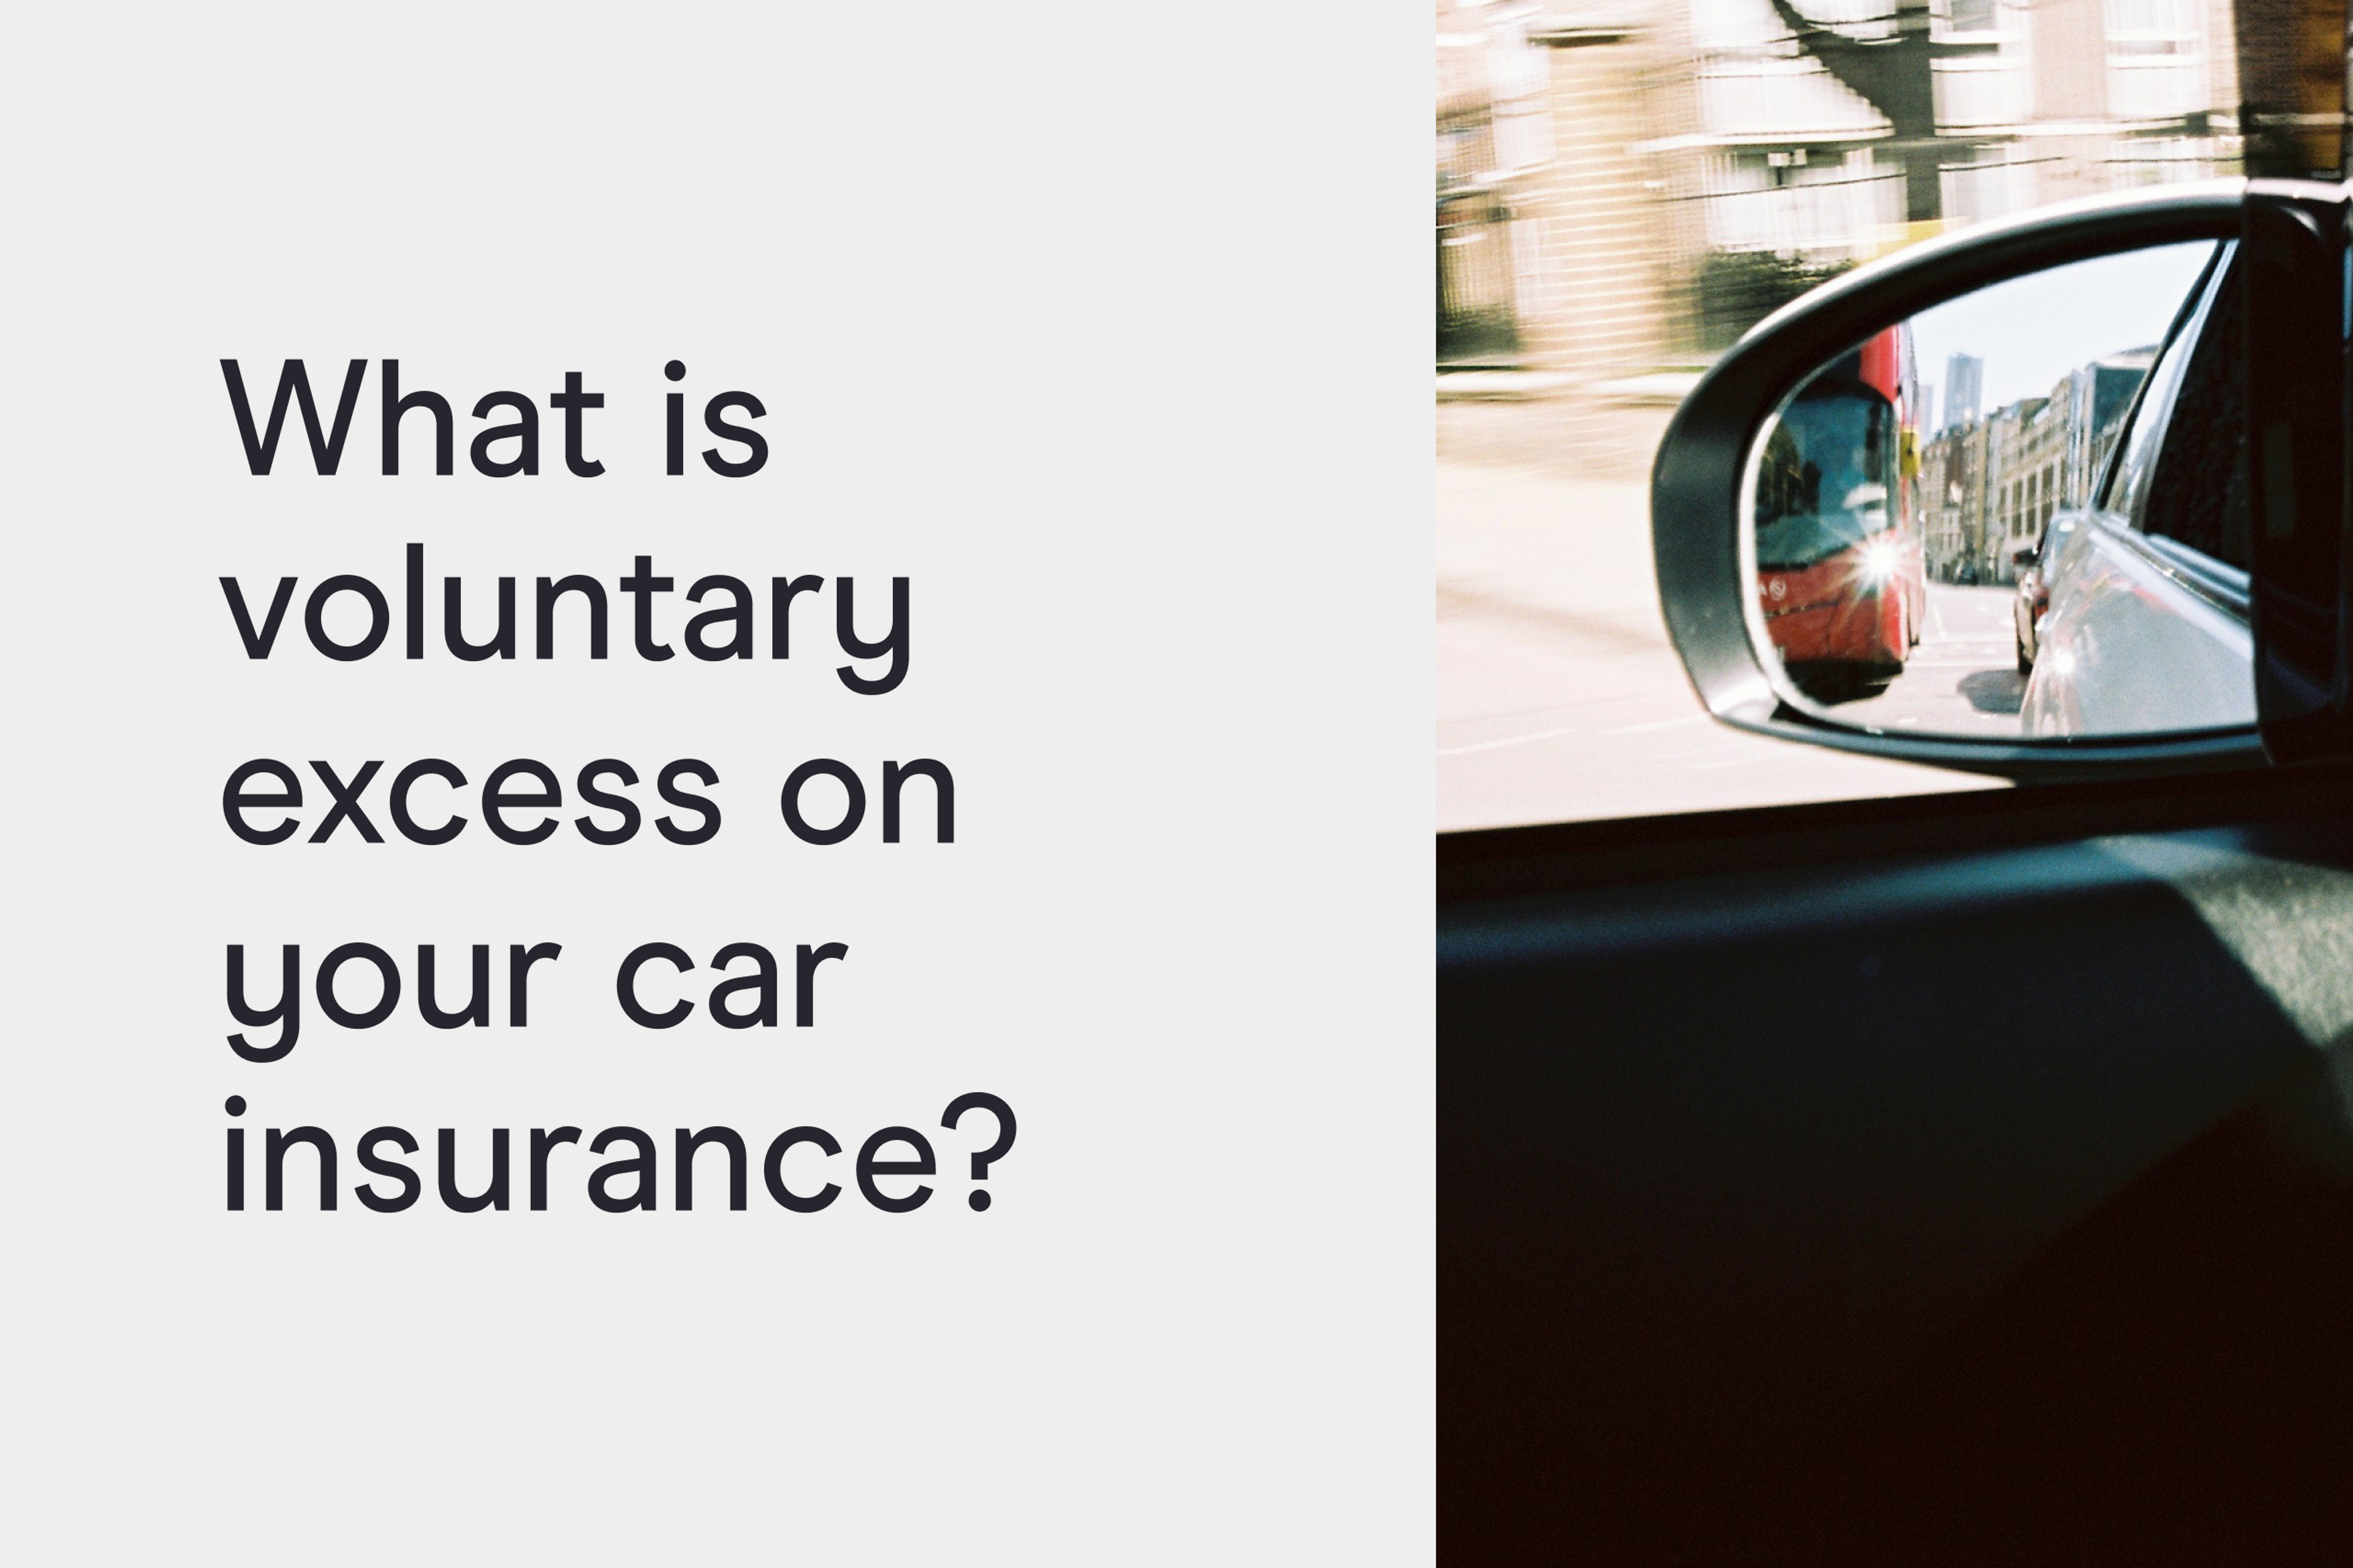 What is voluntary excess on your car insurance?